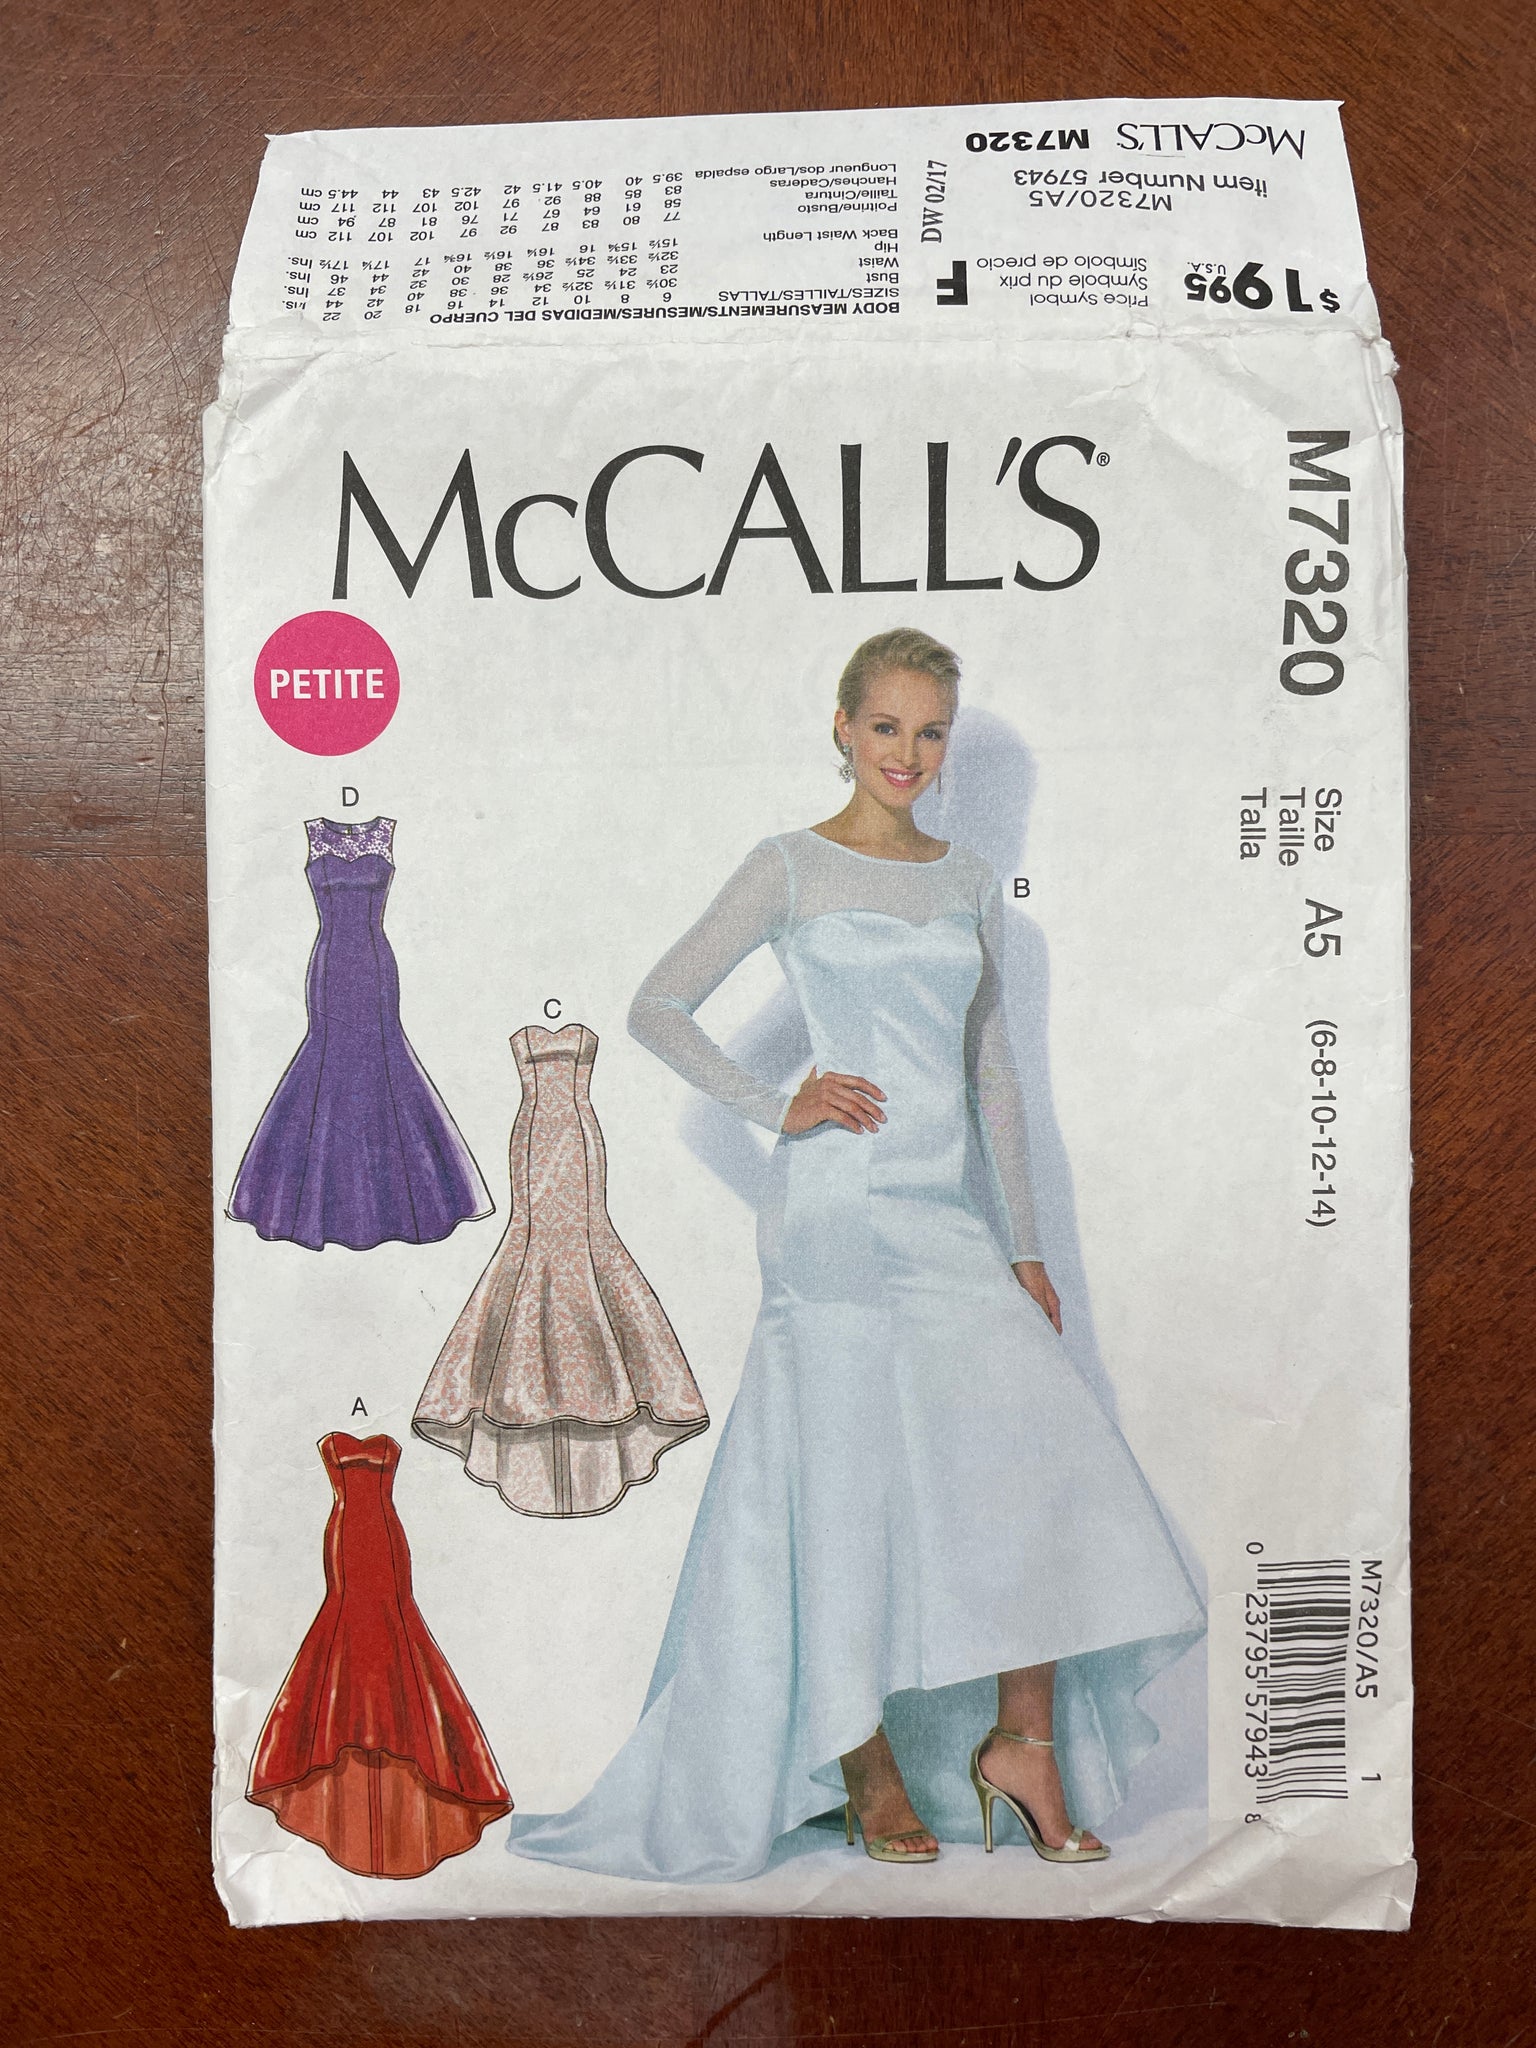 2016 McCall's 7320 Pattern - Dress with Train FACTORY FOLDED